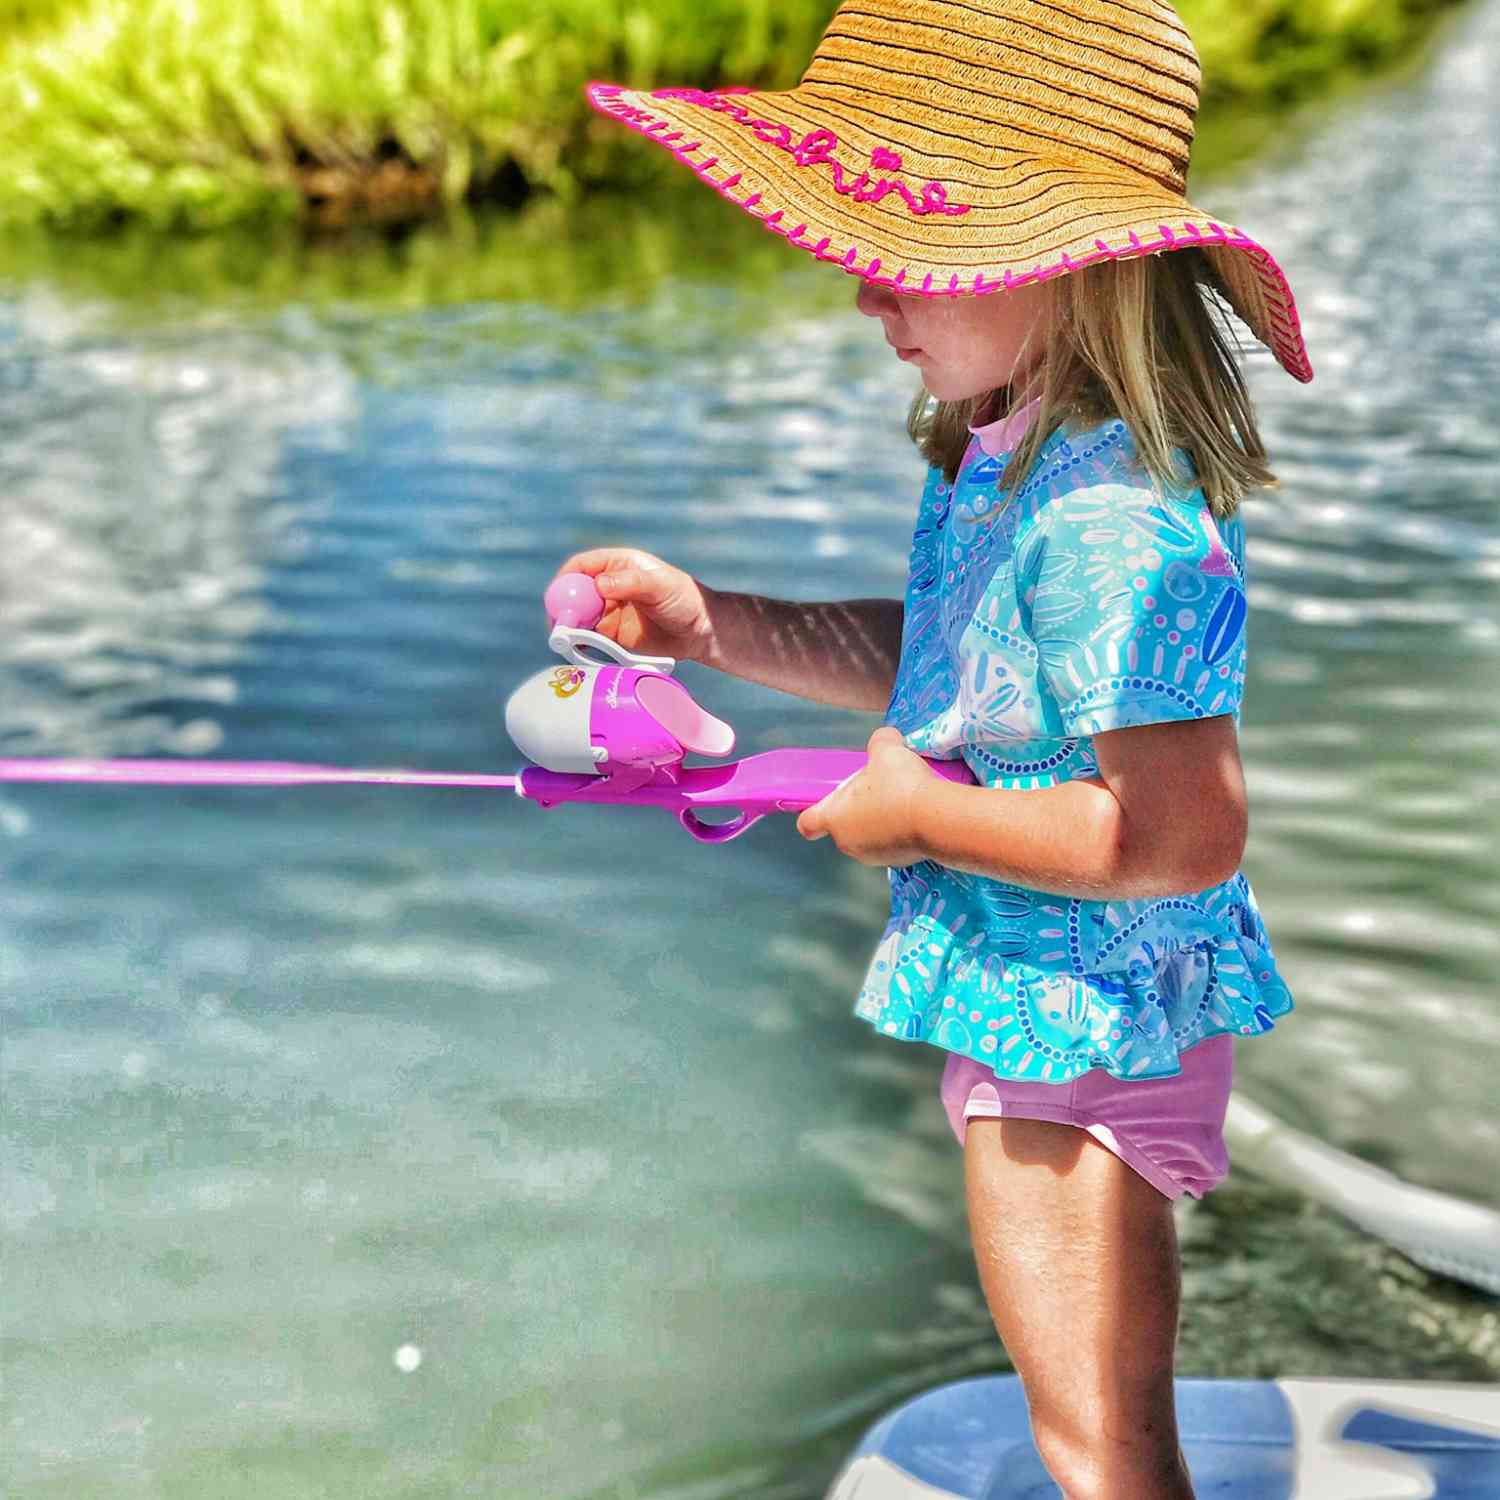 A 5 year old Little Girl who loves to out fish her daddy and brother with her pink fishing pole...